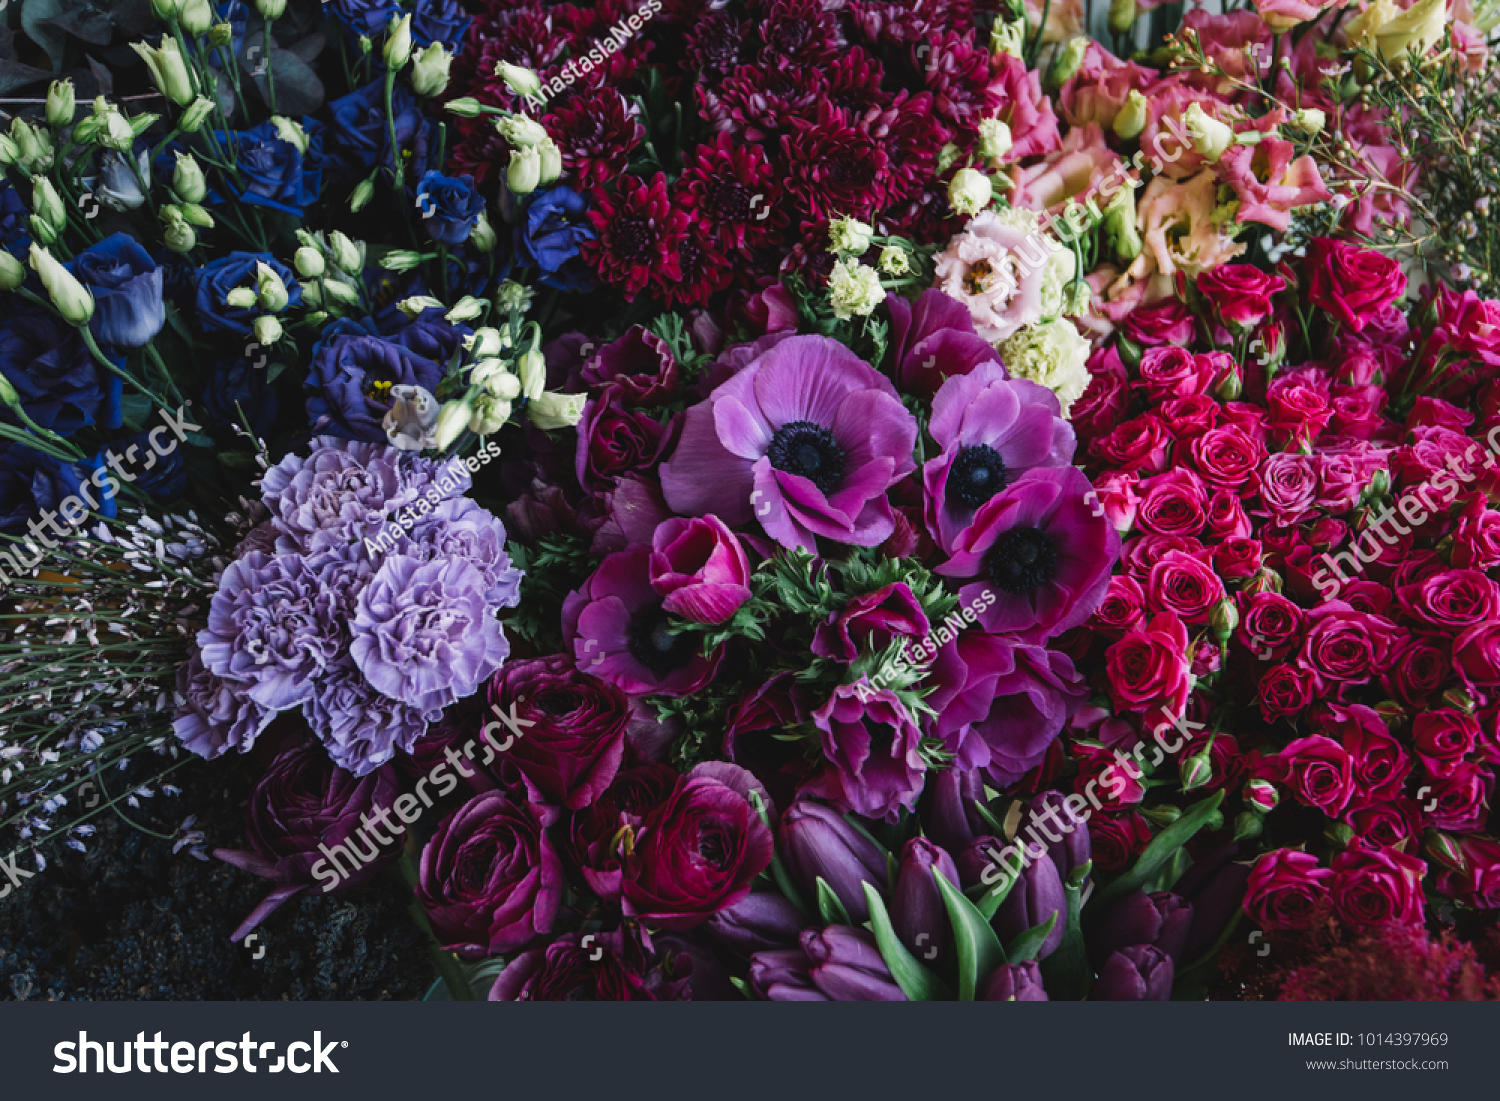 Beautiful and tender blossoming and endless fresh flowers at the florist shop in lavender, pink and purple colors #1014397969